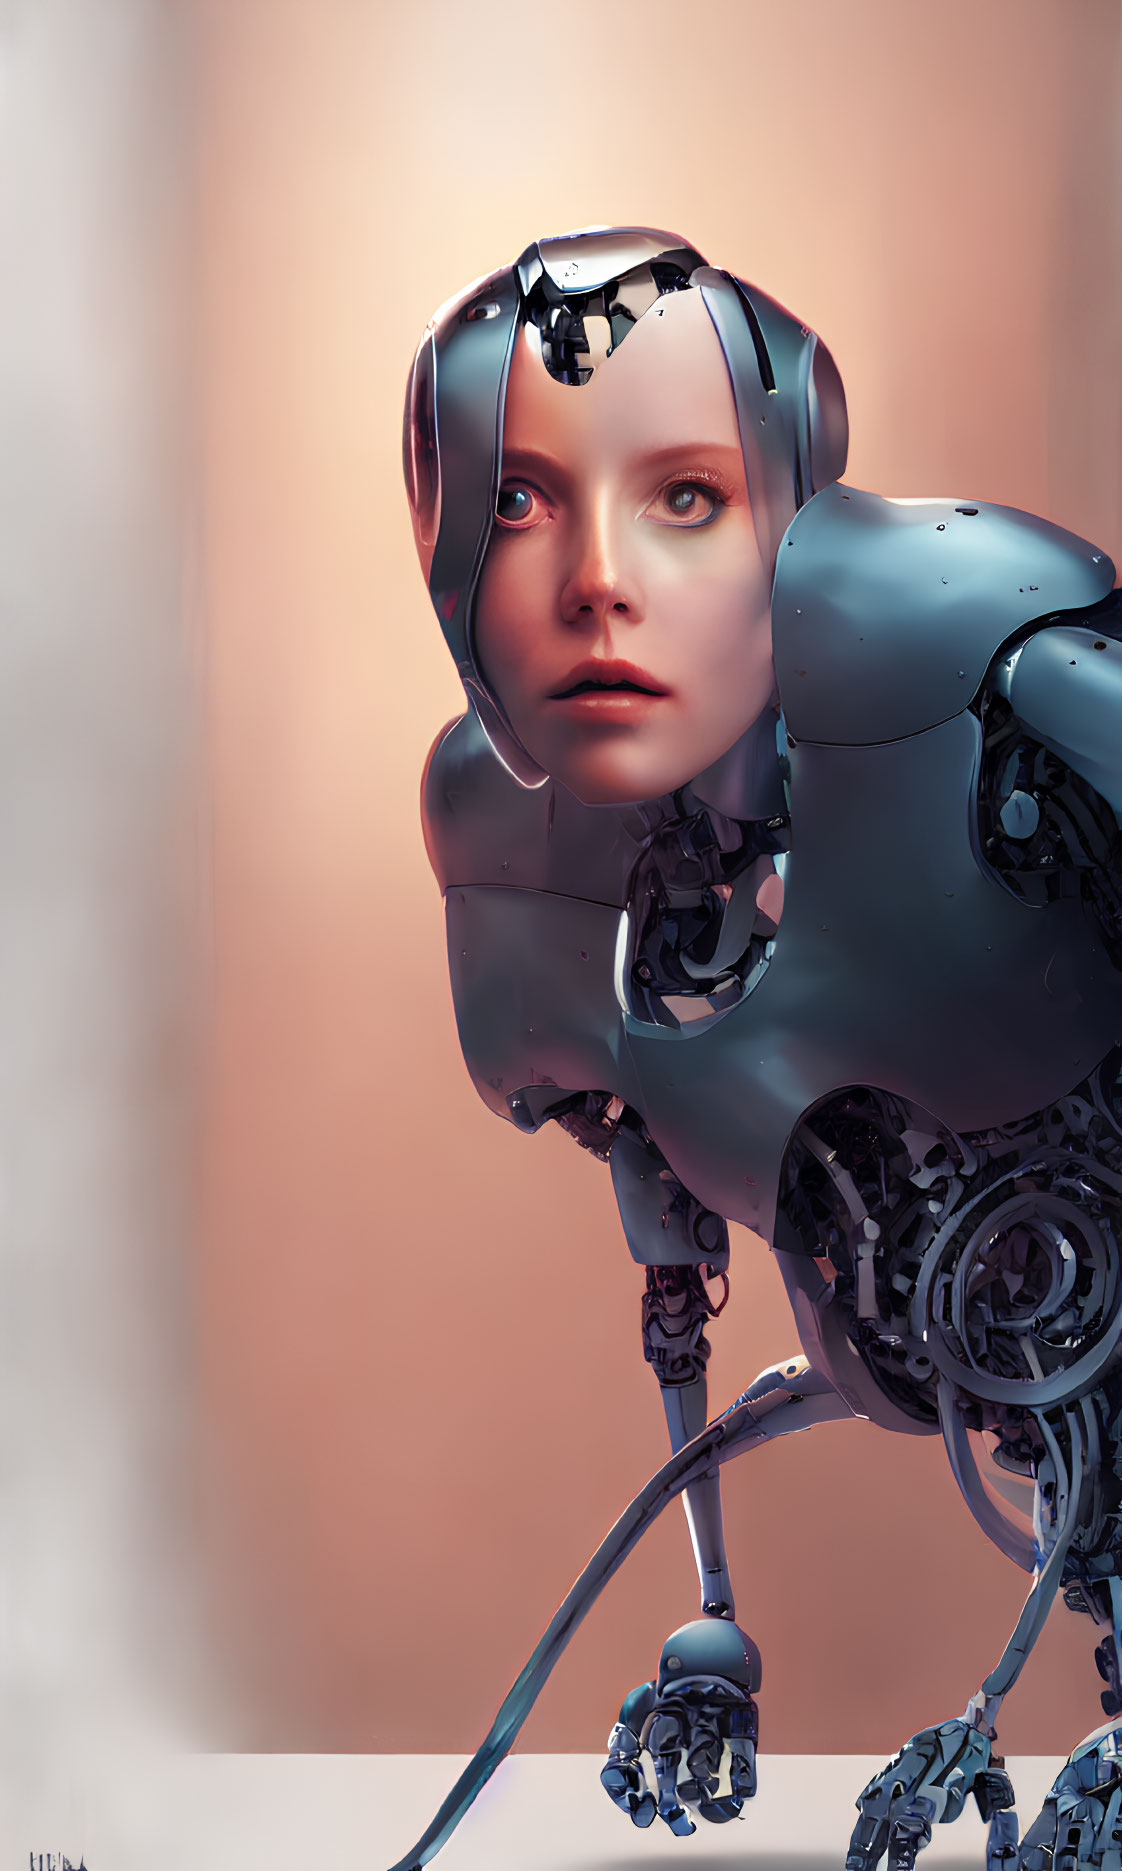 Detailed Humanoid Female Robot with Lifelike Mechanical Parts and Soft Background